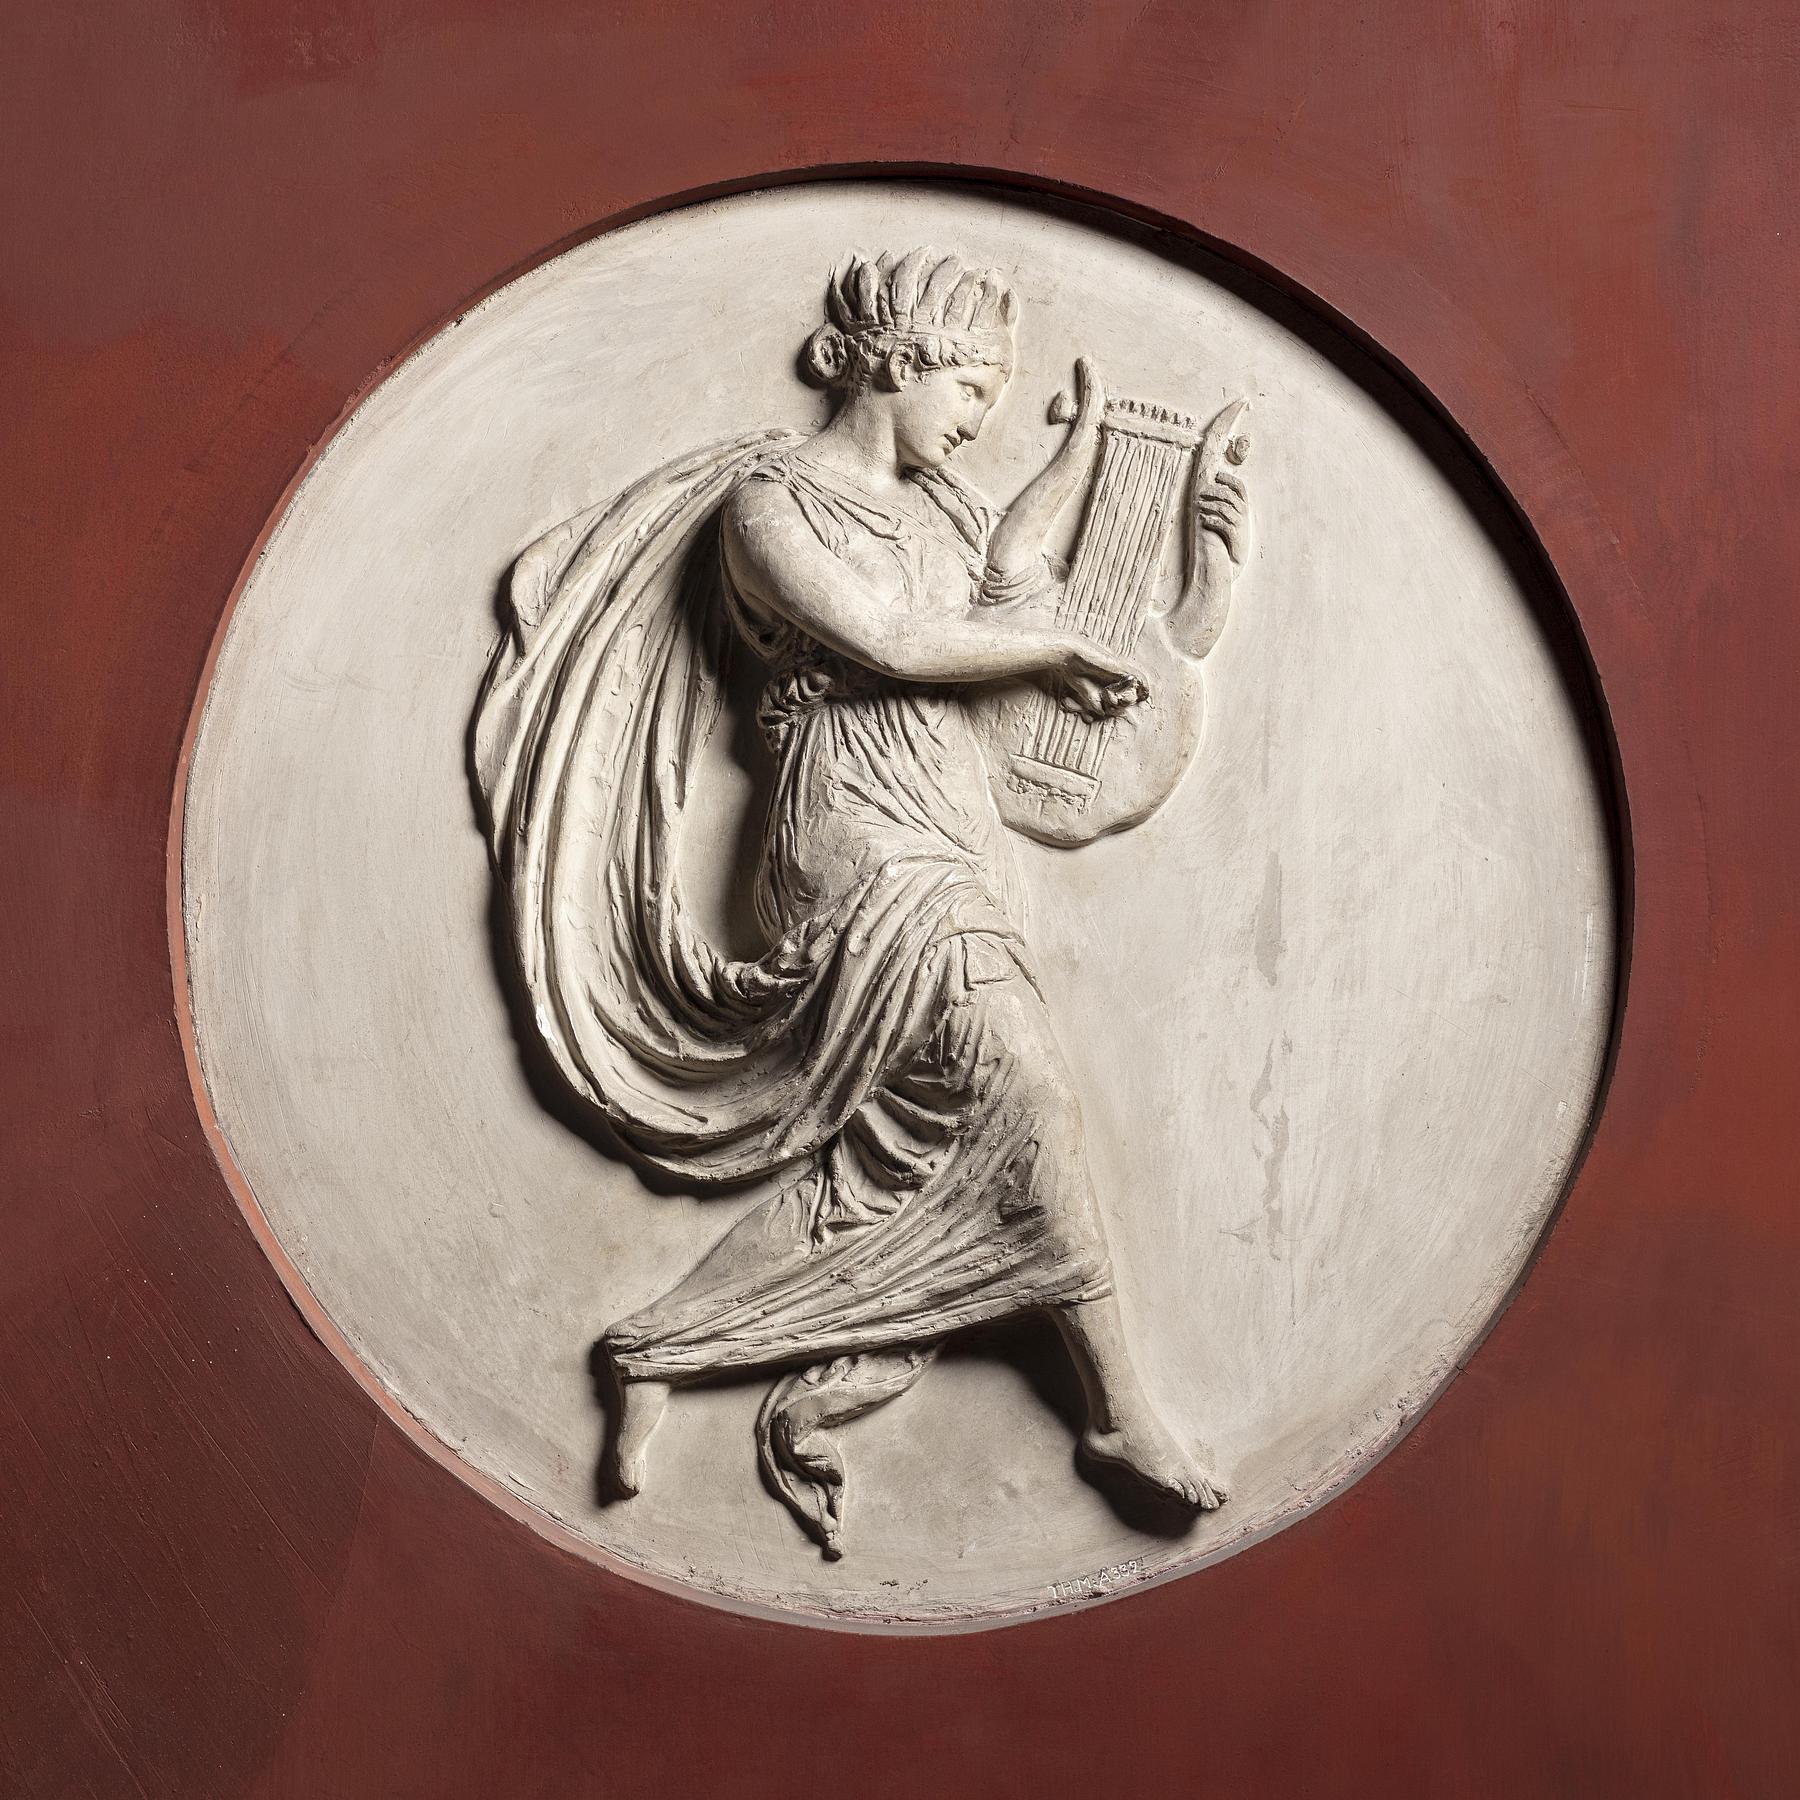 Terpsichore. Muse of Dancing, A332